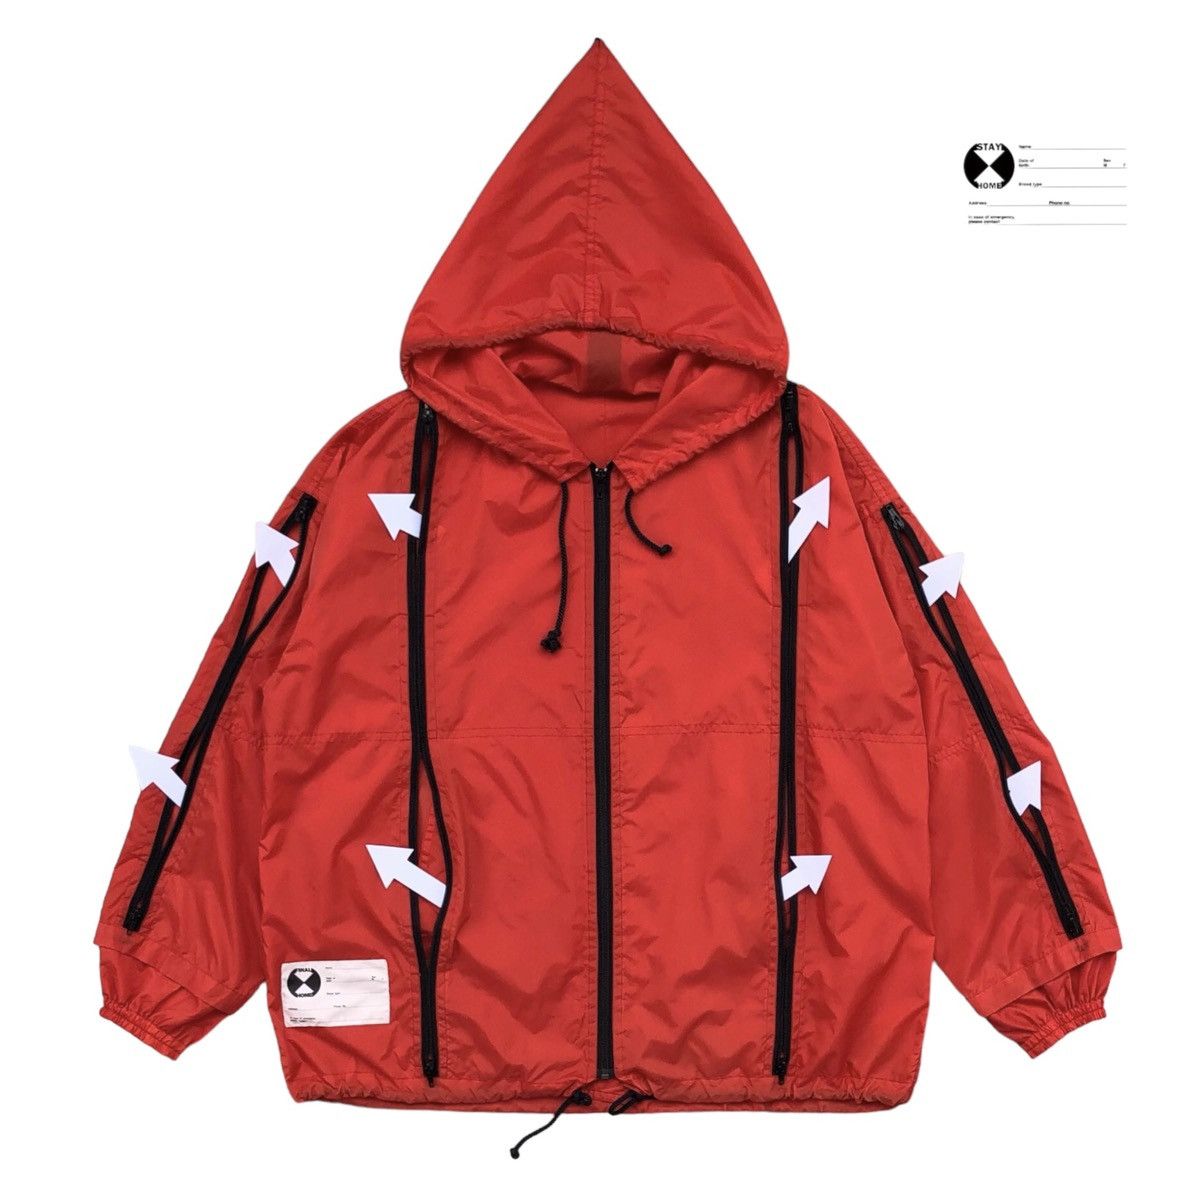 Issey Miyake 🔥OG Archive Issey Miyake Final Home Survival Jacket | Grailed